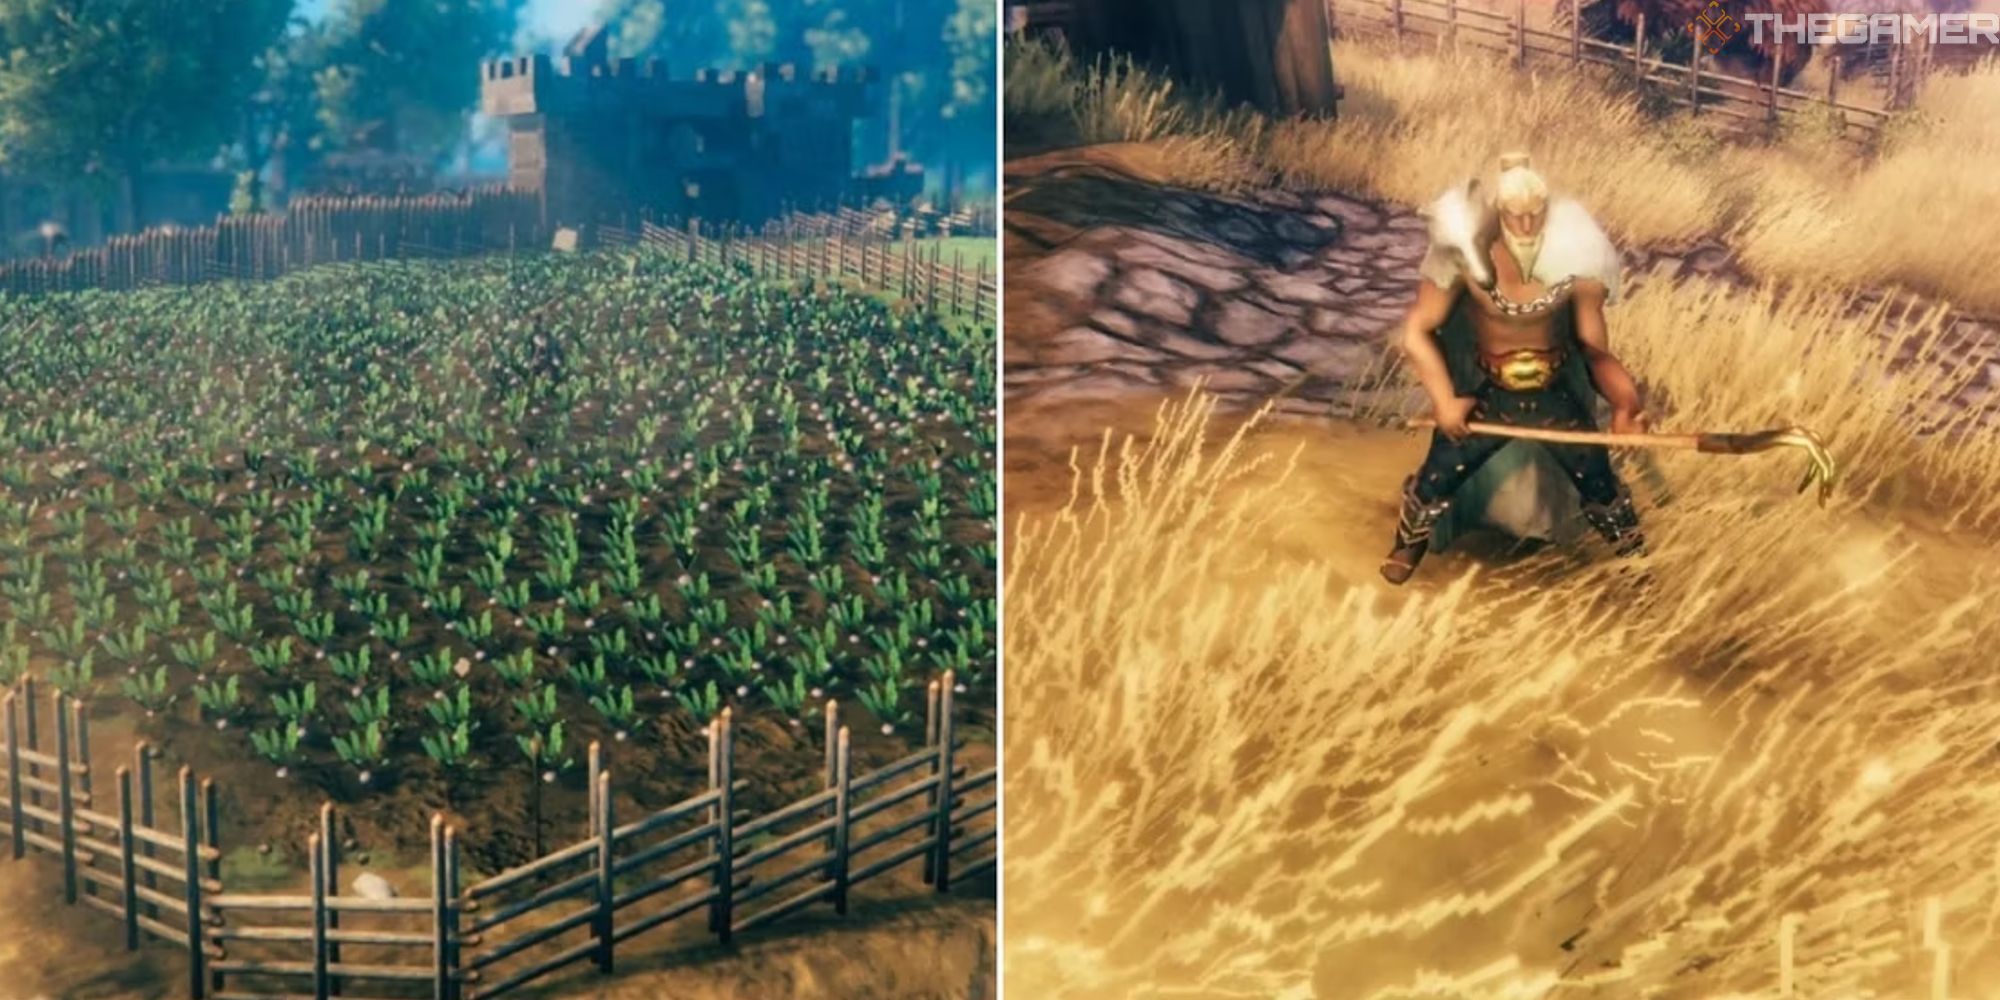 split image showing farmland next to image of player with a cultivator